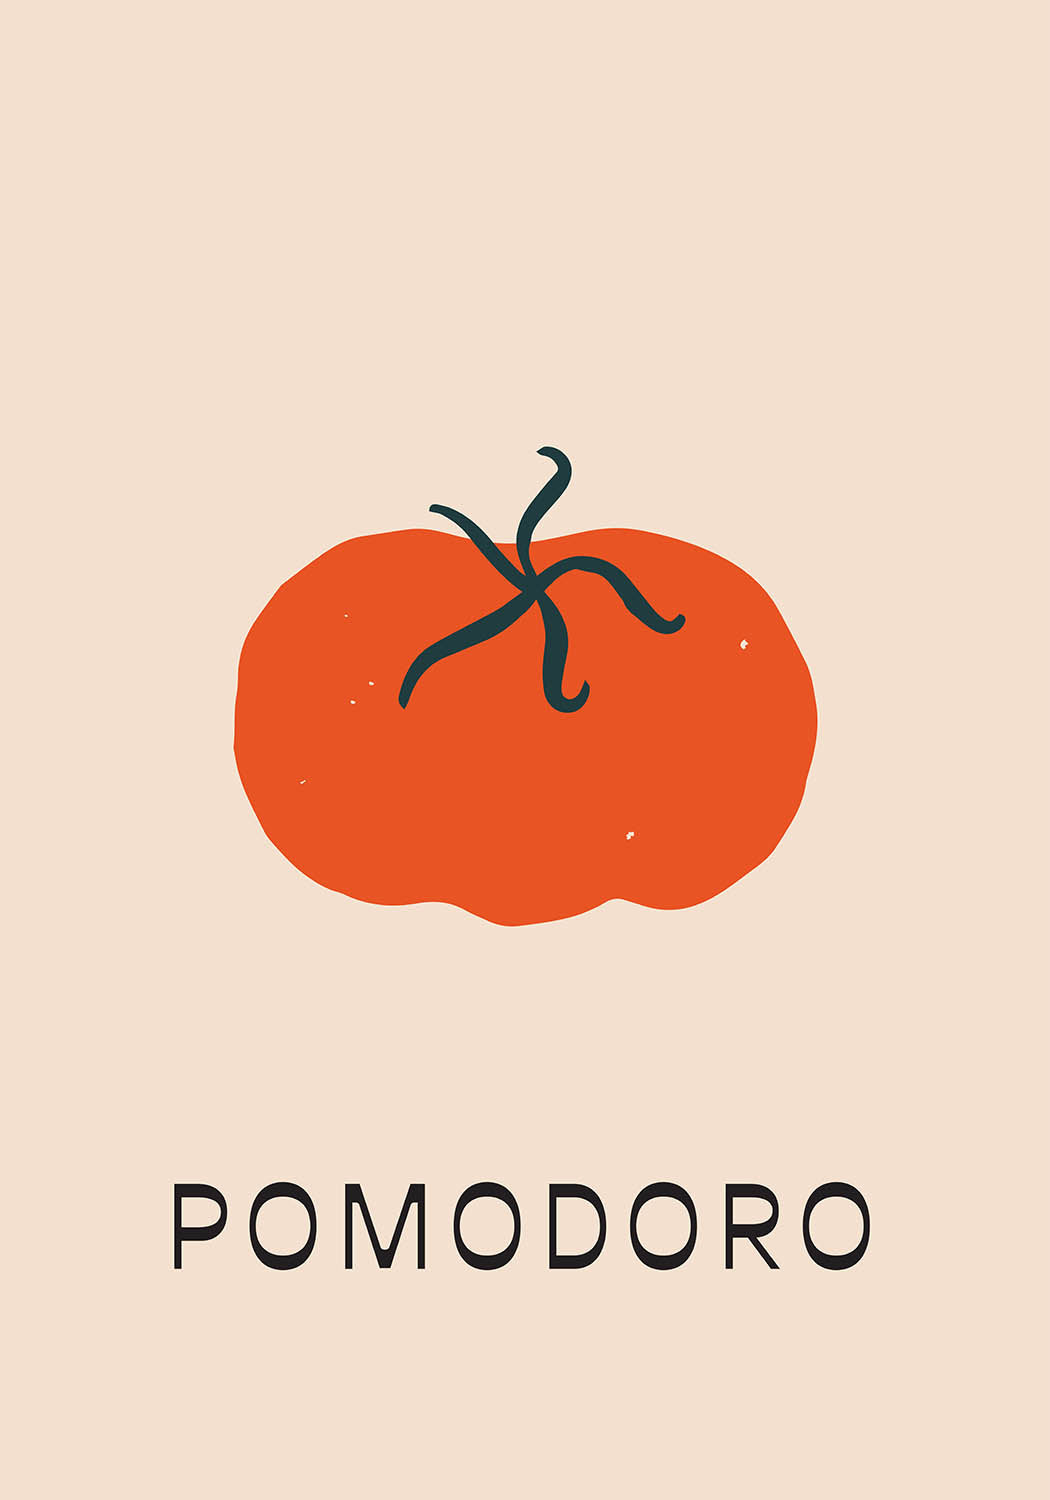 A playful and minimalist illustration of a bright red tomato with a whimsical, curly stem on a pale background with the word 'POMODORO' beneath it.